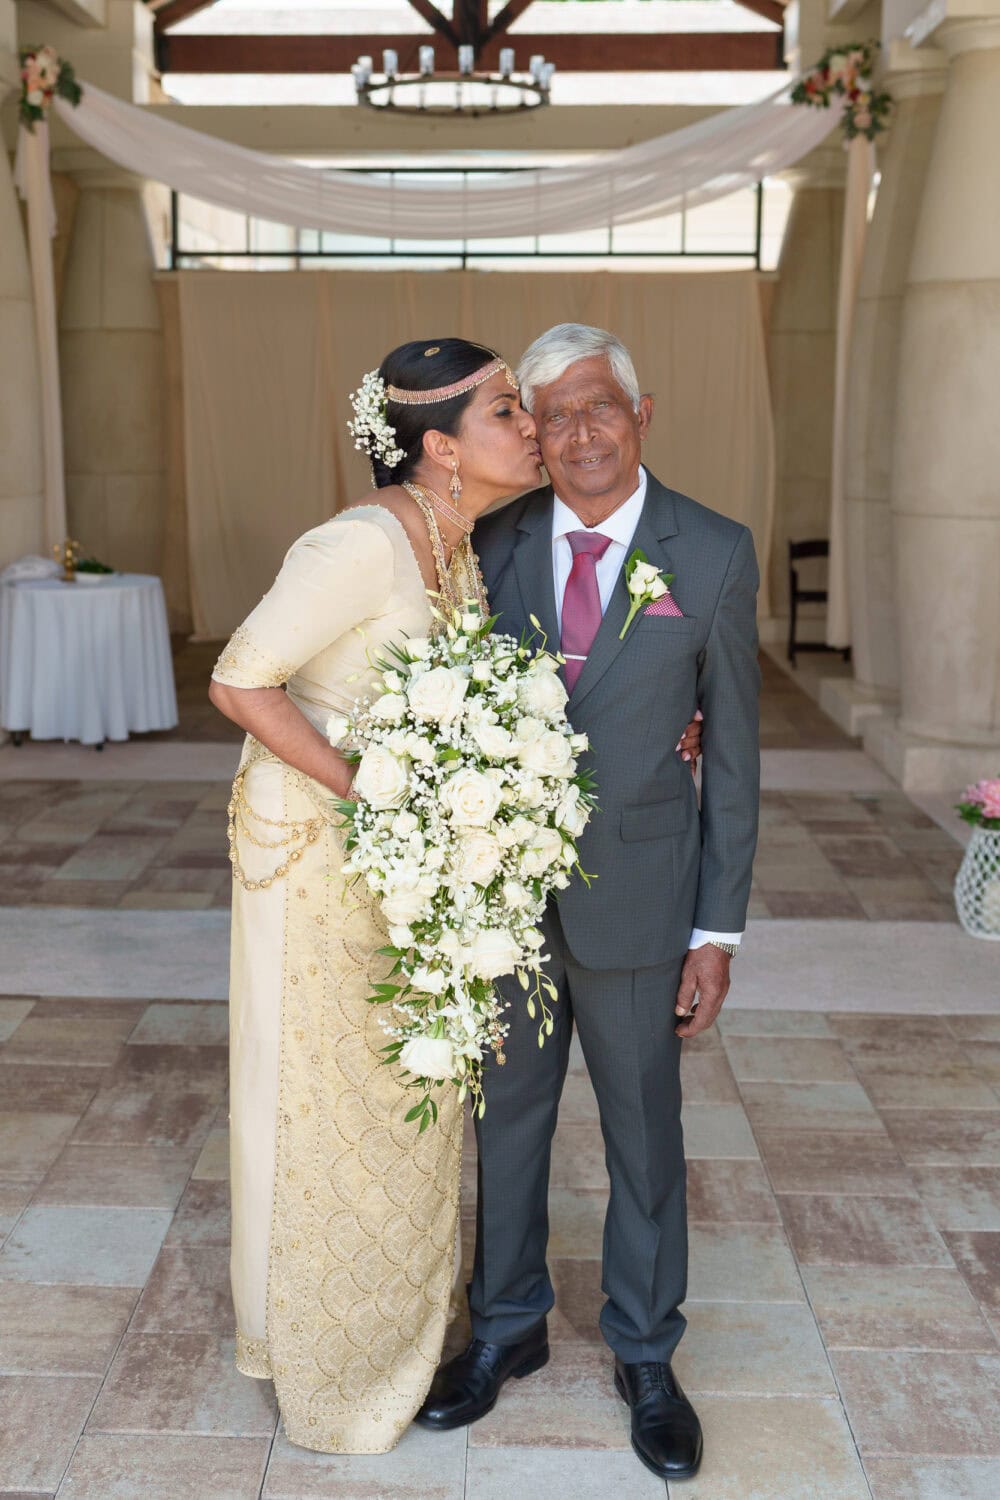 Bride giving father kiss on the cheeks - 21 Main Events